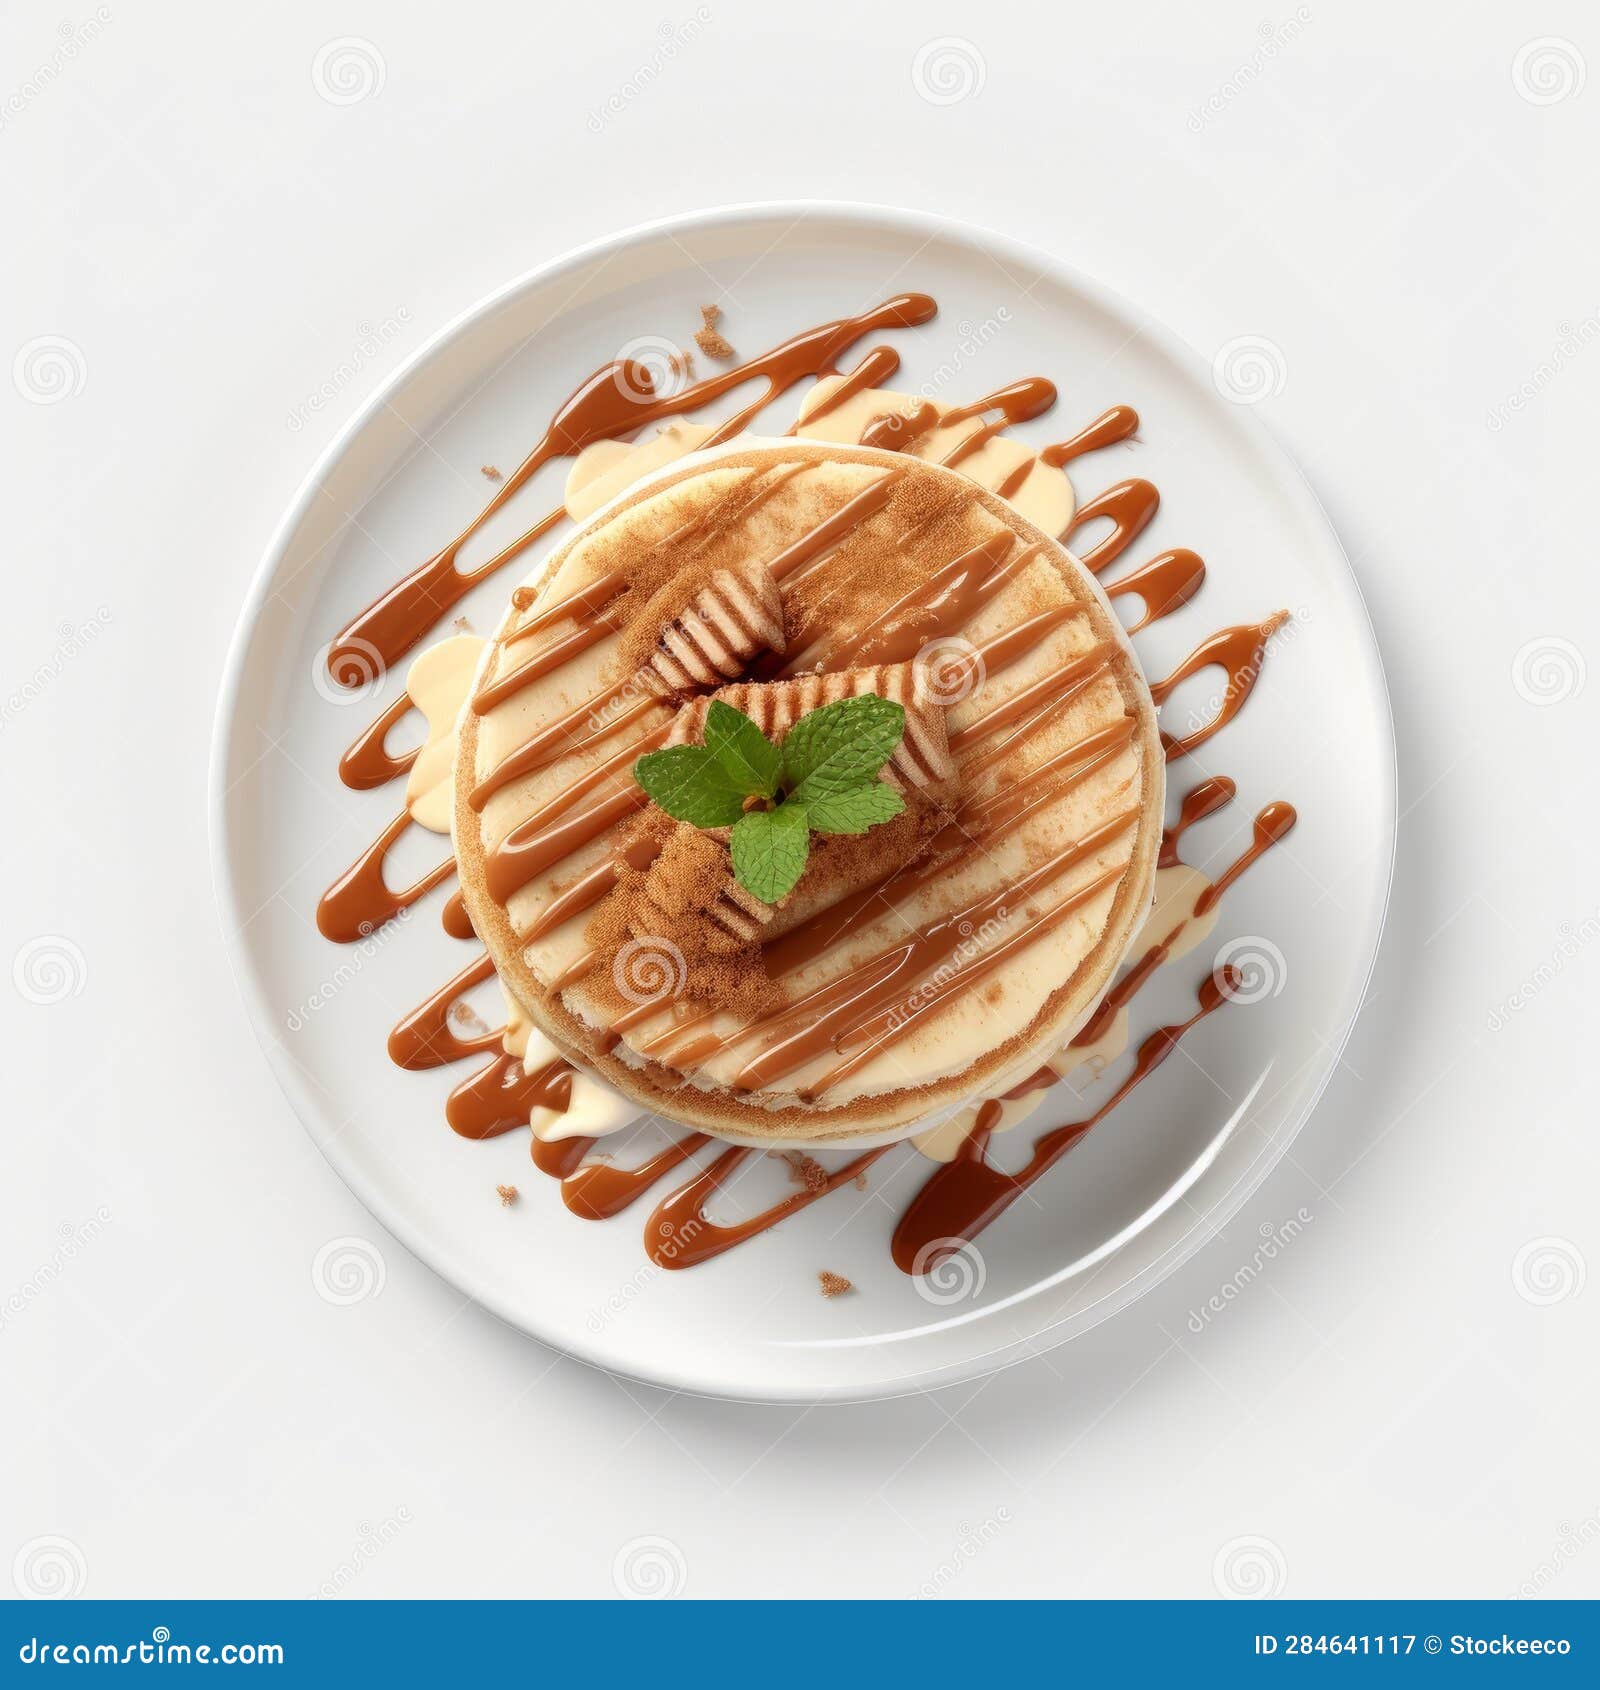 photorealistic pancake plate with coffee and sauce